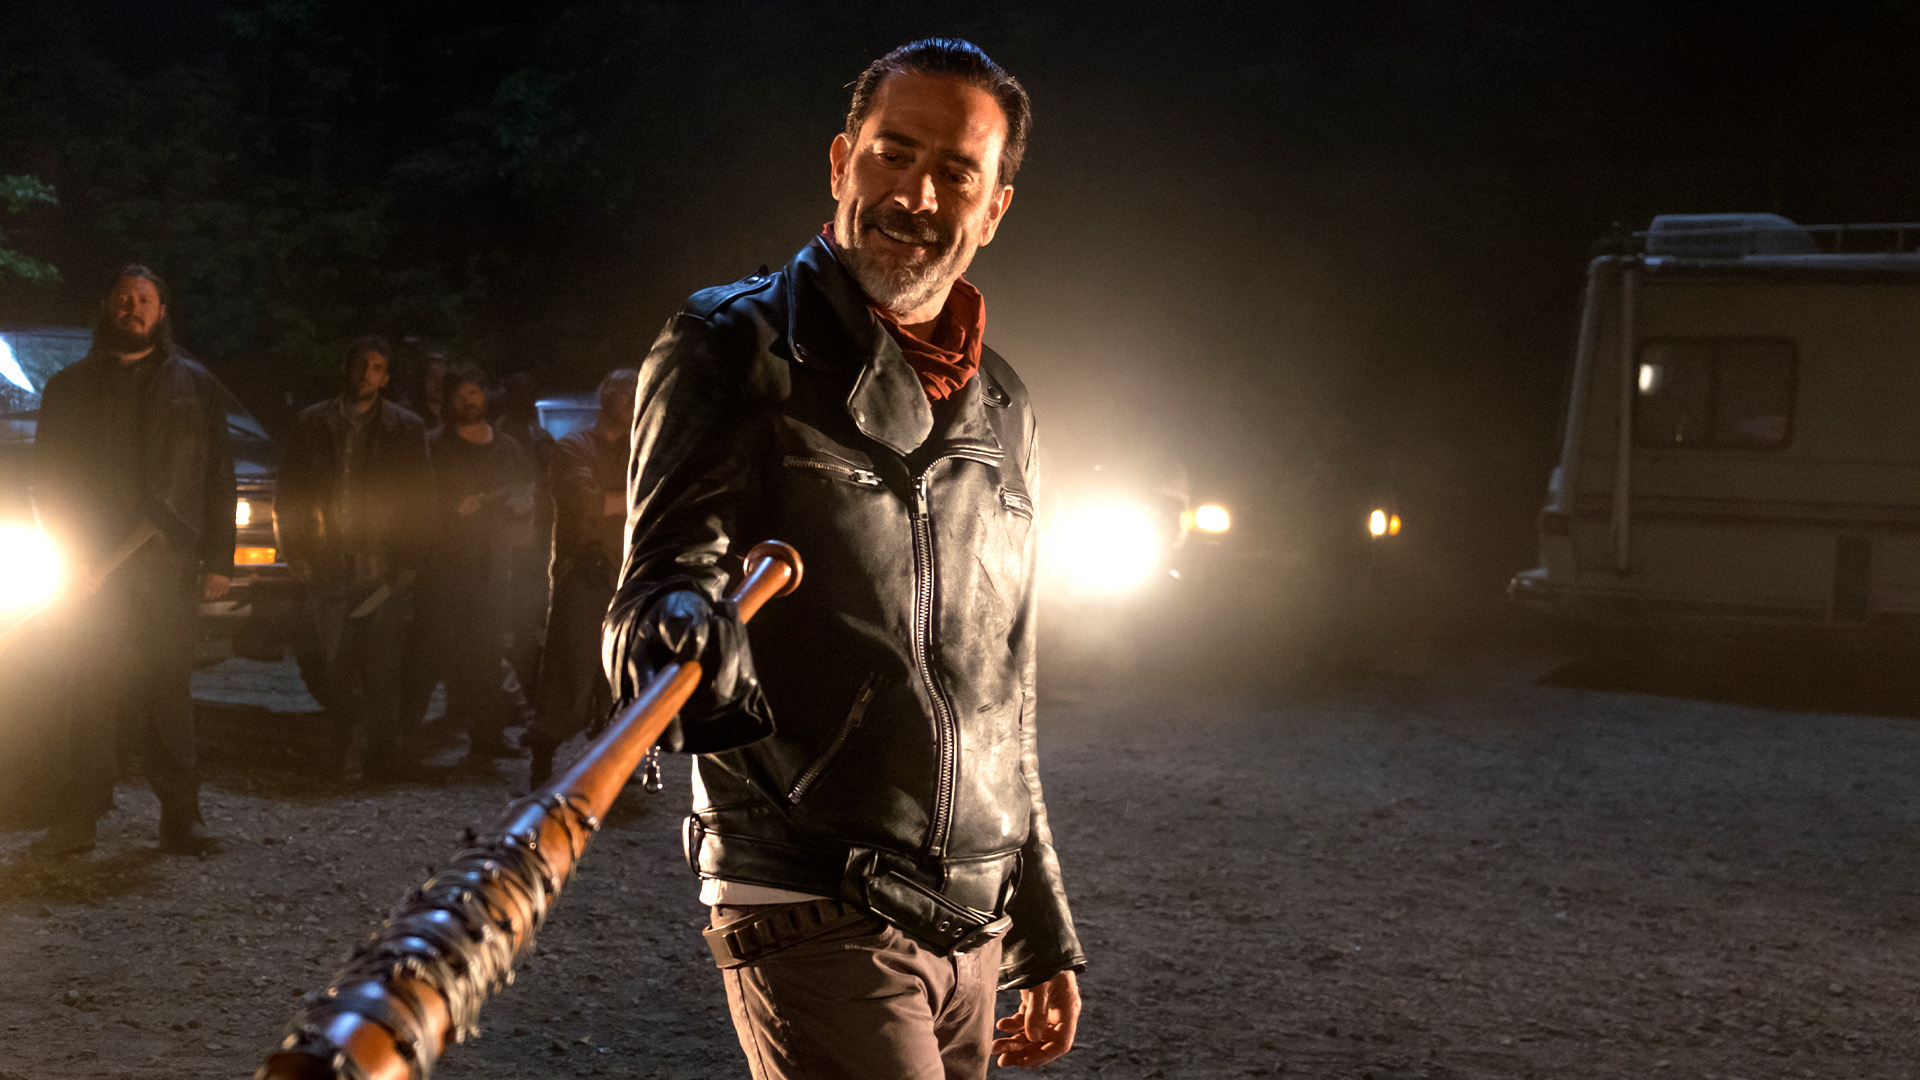 The Day Will Come When You Won't Be: Best of Negan Addition, Relive Negan's best moments in this iconic episode from Season 7; Rick and the group kneel helplessly before Negan and his group; what Negan does will haunt those who survive forever., Season 1031323, Episode 6